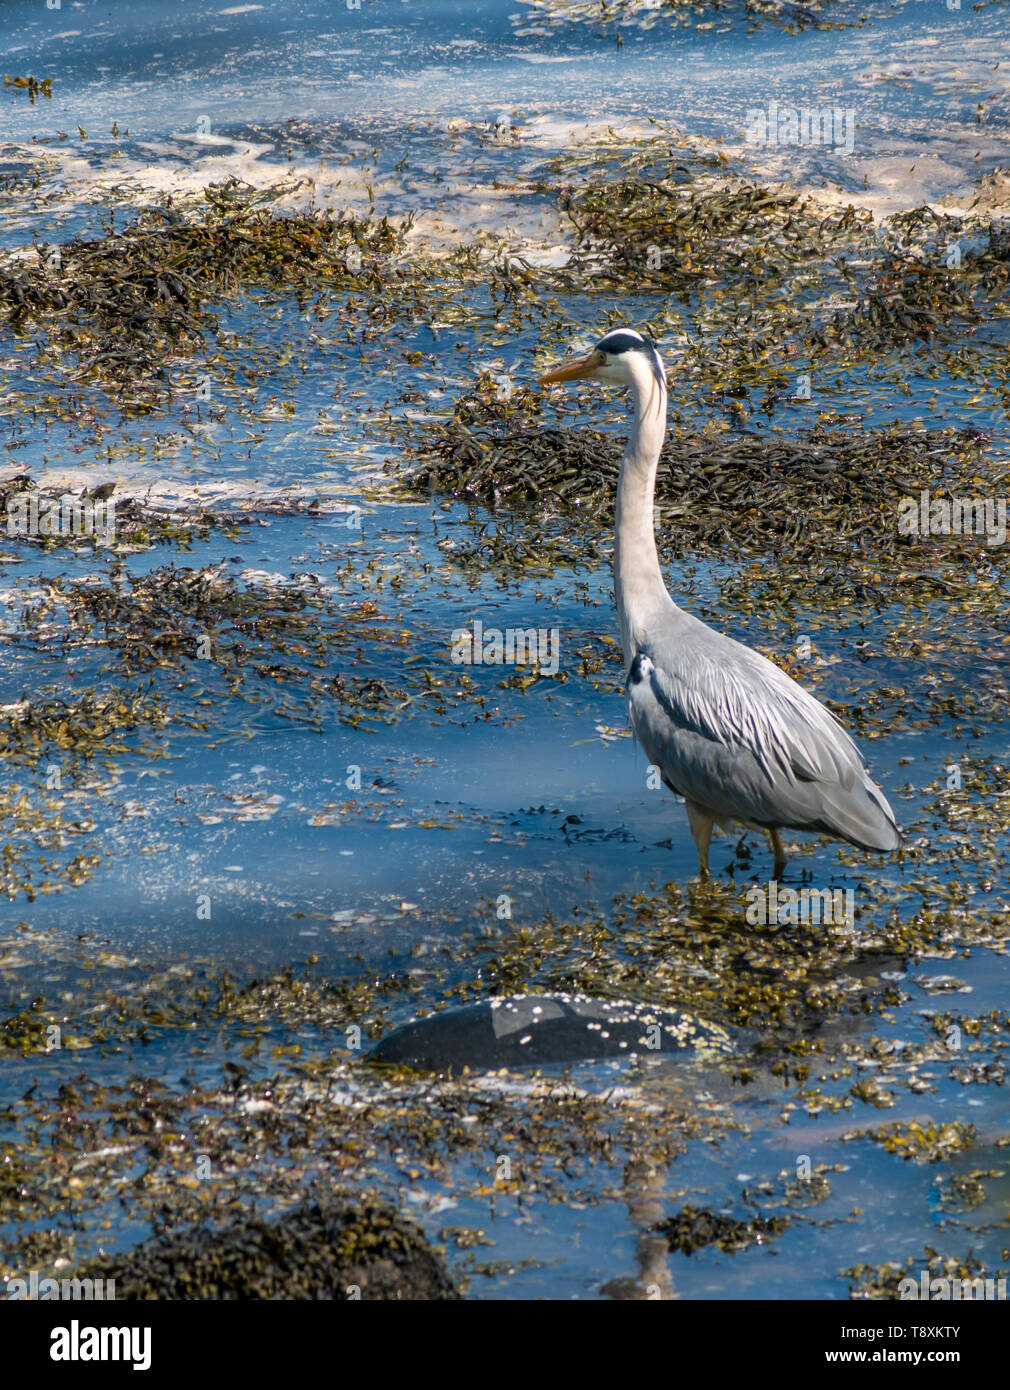 South Queensferry, Scotland, United Kingdom, 15 May 2019. UK Weather: A hot sunny day on the Firth of Forth coast.  A grey heron cools off in the sea among seaweed Stock Photo